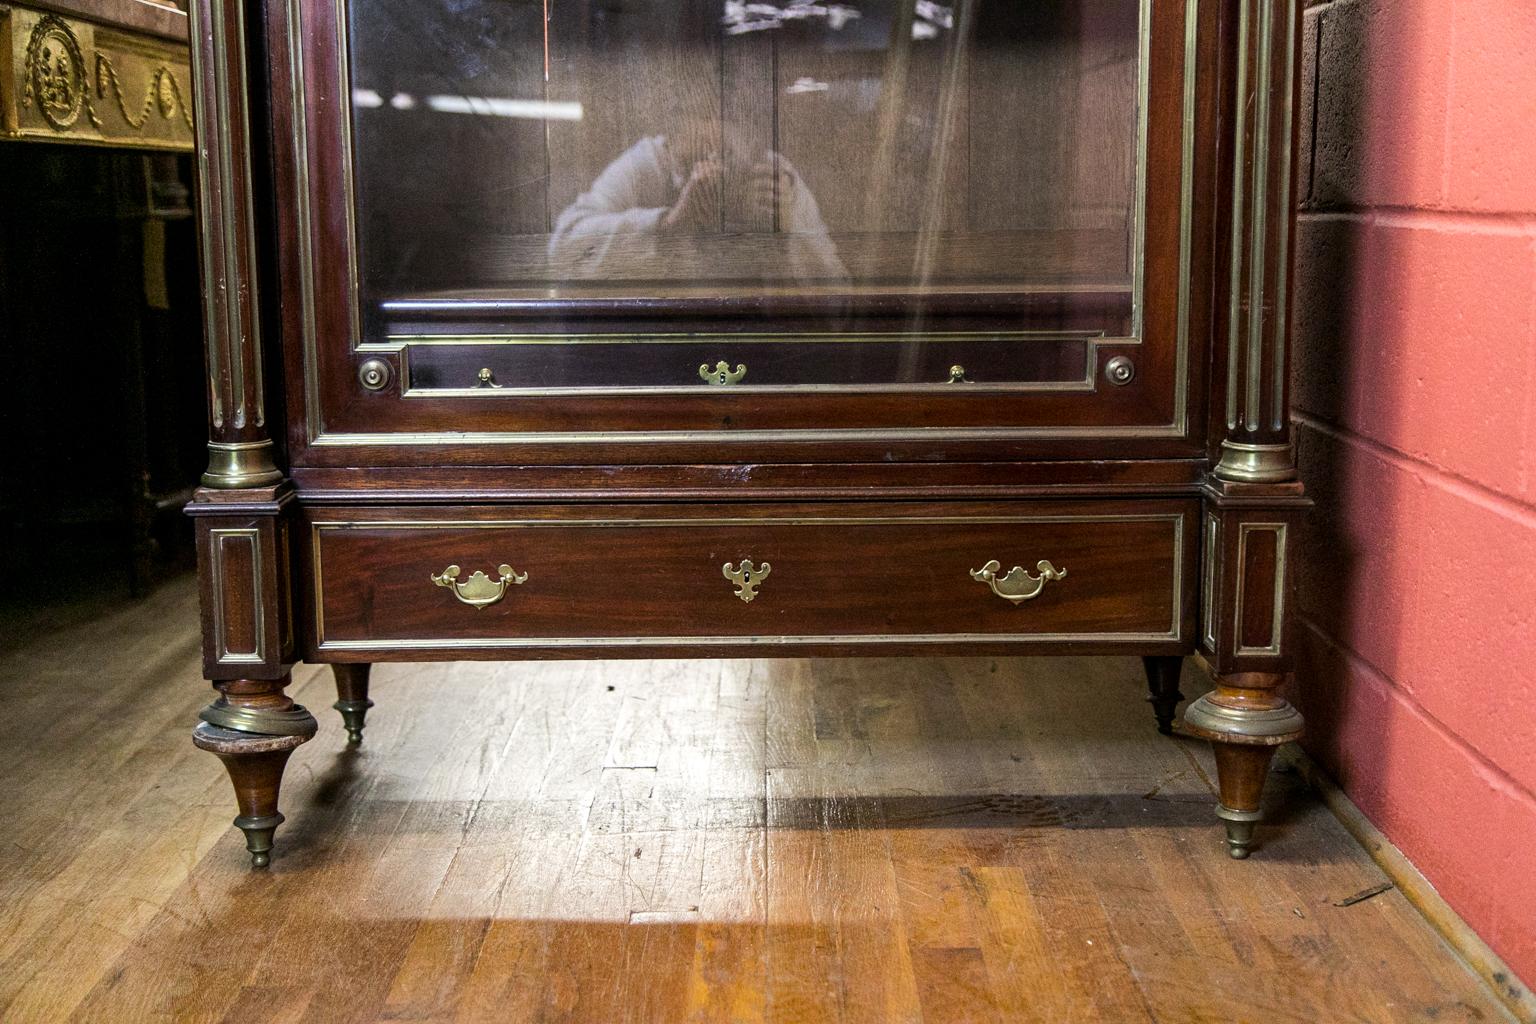 This French mahogany display cabinet or bookcase has brass trim moldings throughout with free standing columns that are fluted with inlaid brass. The interior has four adjustable shelves and a single drawer as well as an exterior drawer in the lower